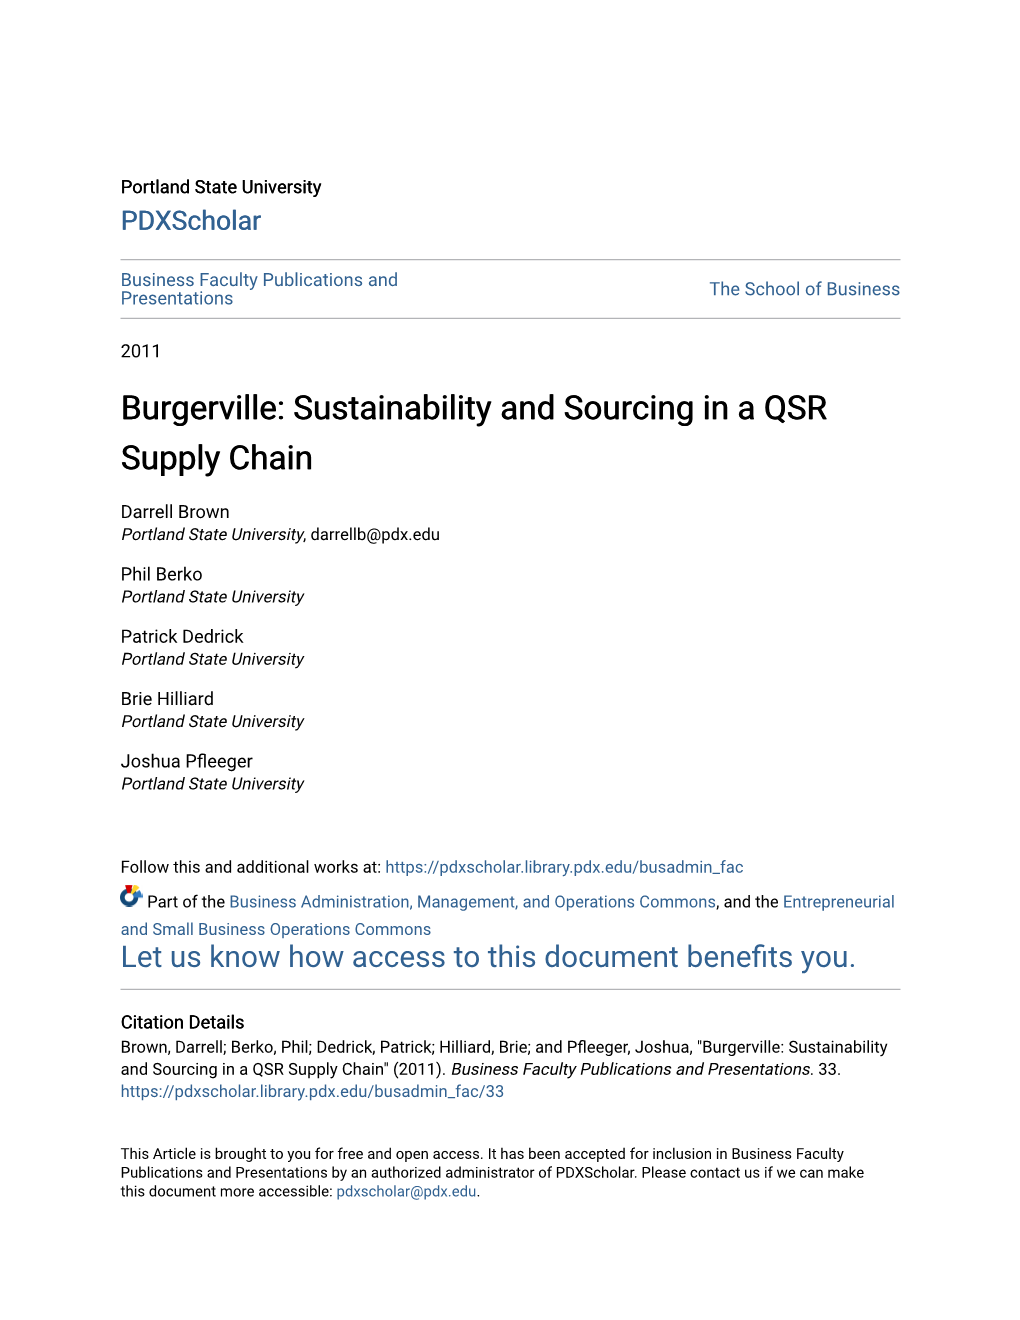 Burgerville: Sustainability and Sourcing in a QSR Supply Chain